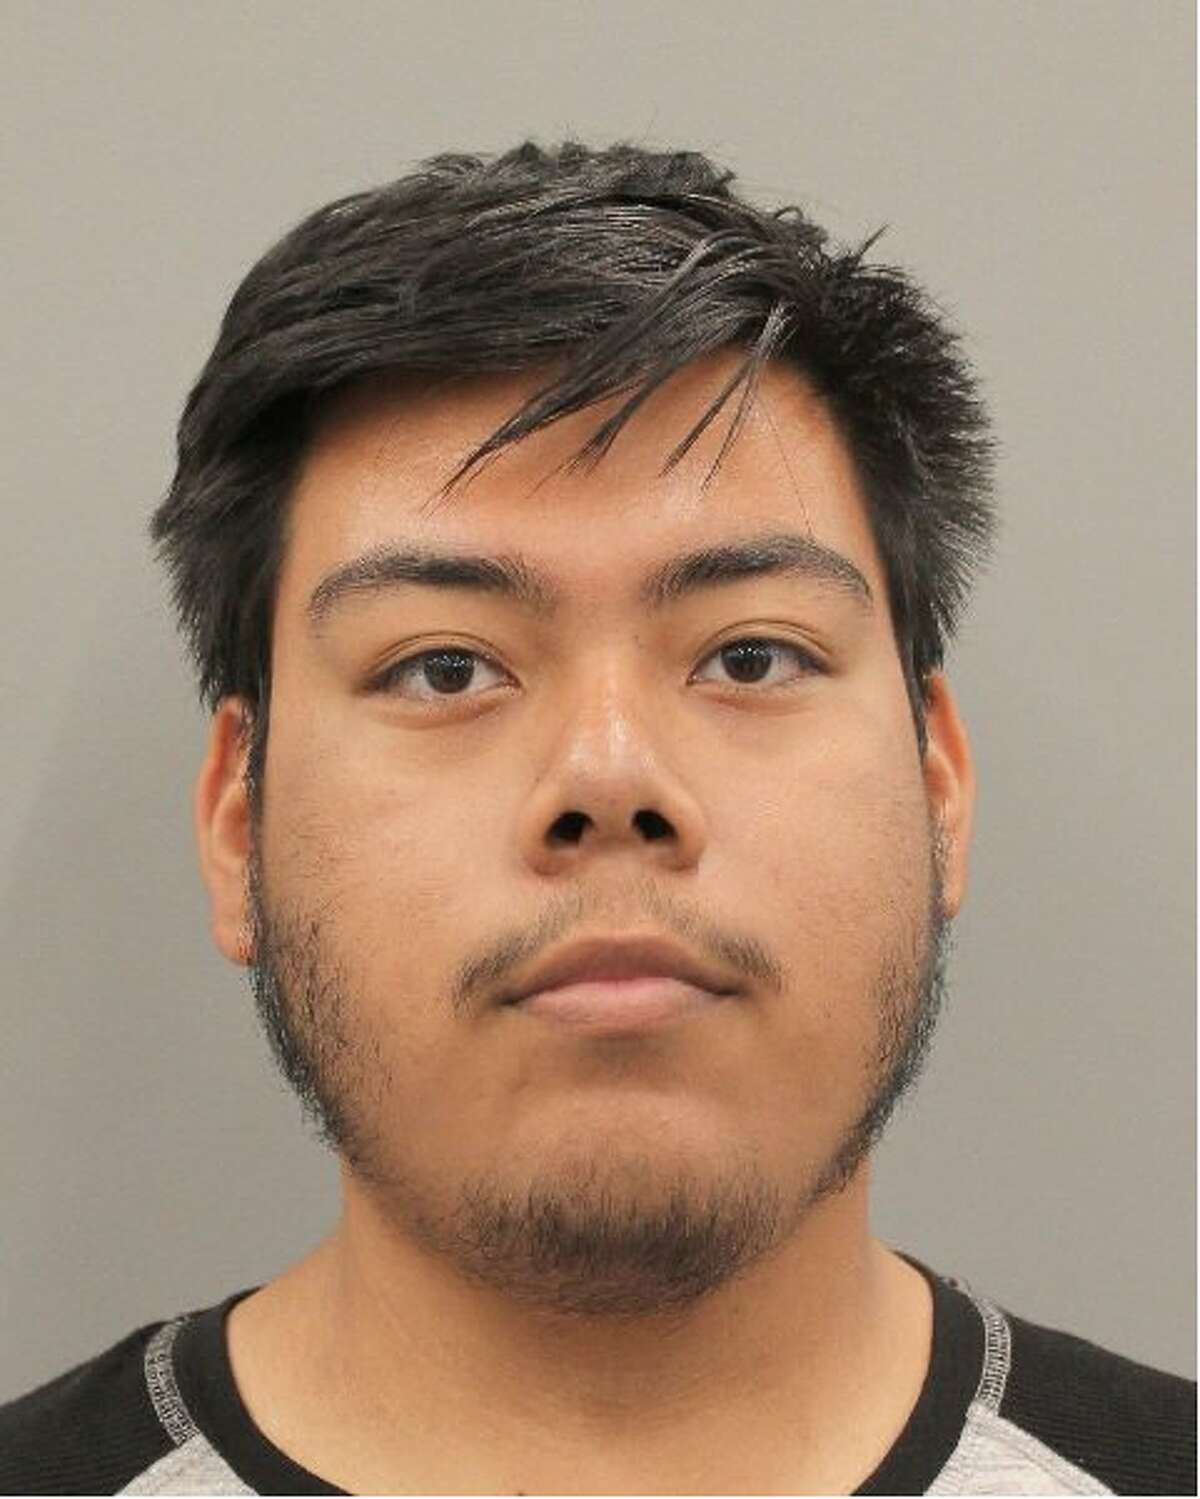 Marco Cobos, 19, allegedly confessed to stabbing an elderly woman multiple times inside her Houston home over the course of 40 minutes to an hour, prosecutors said.